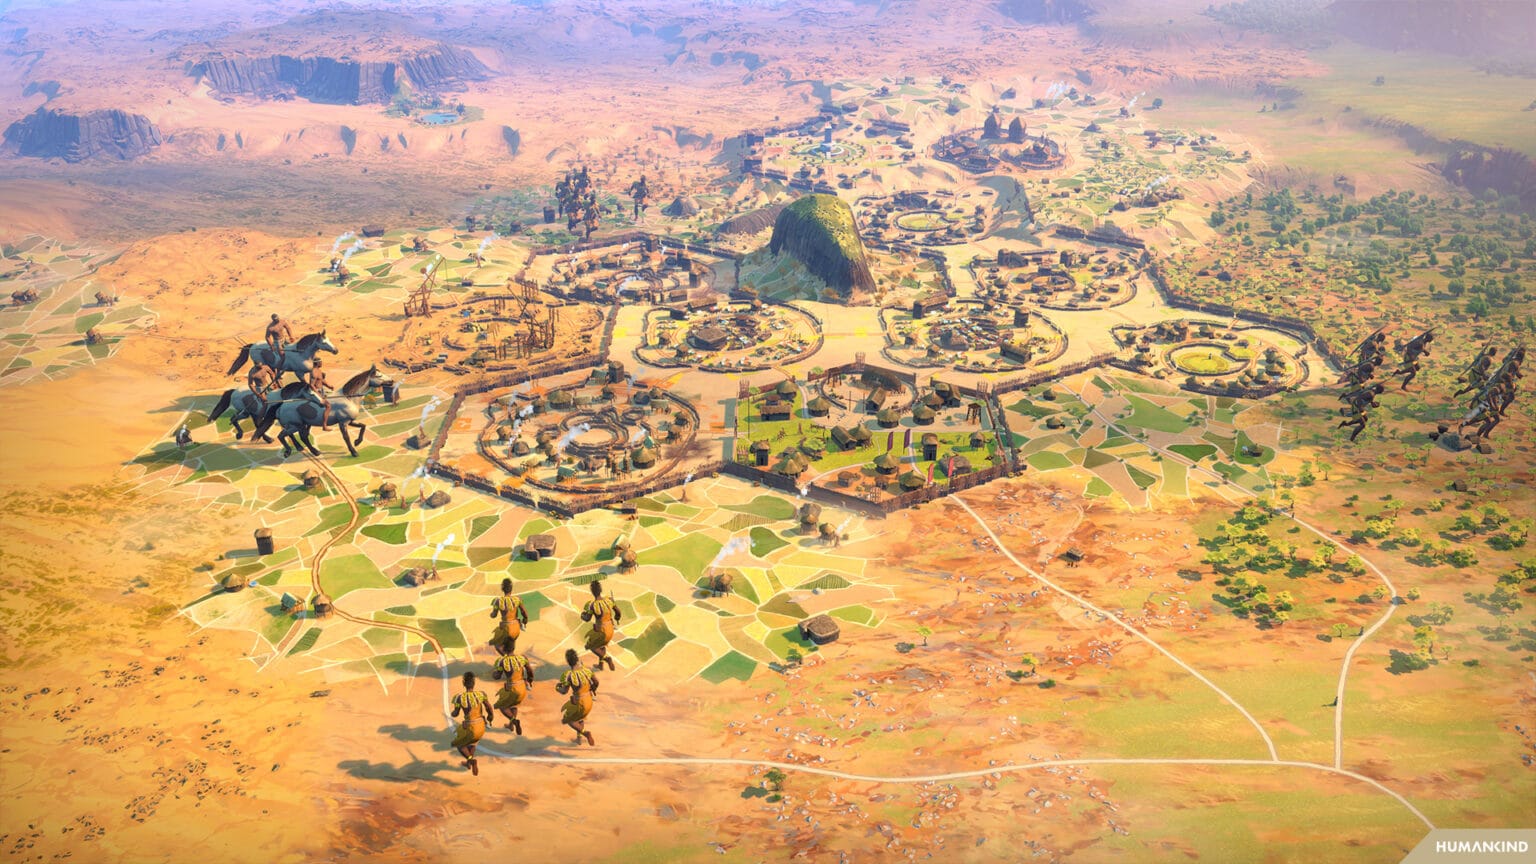 To go with the DLC, there are also some new atmospheric African maps.